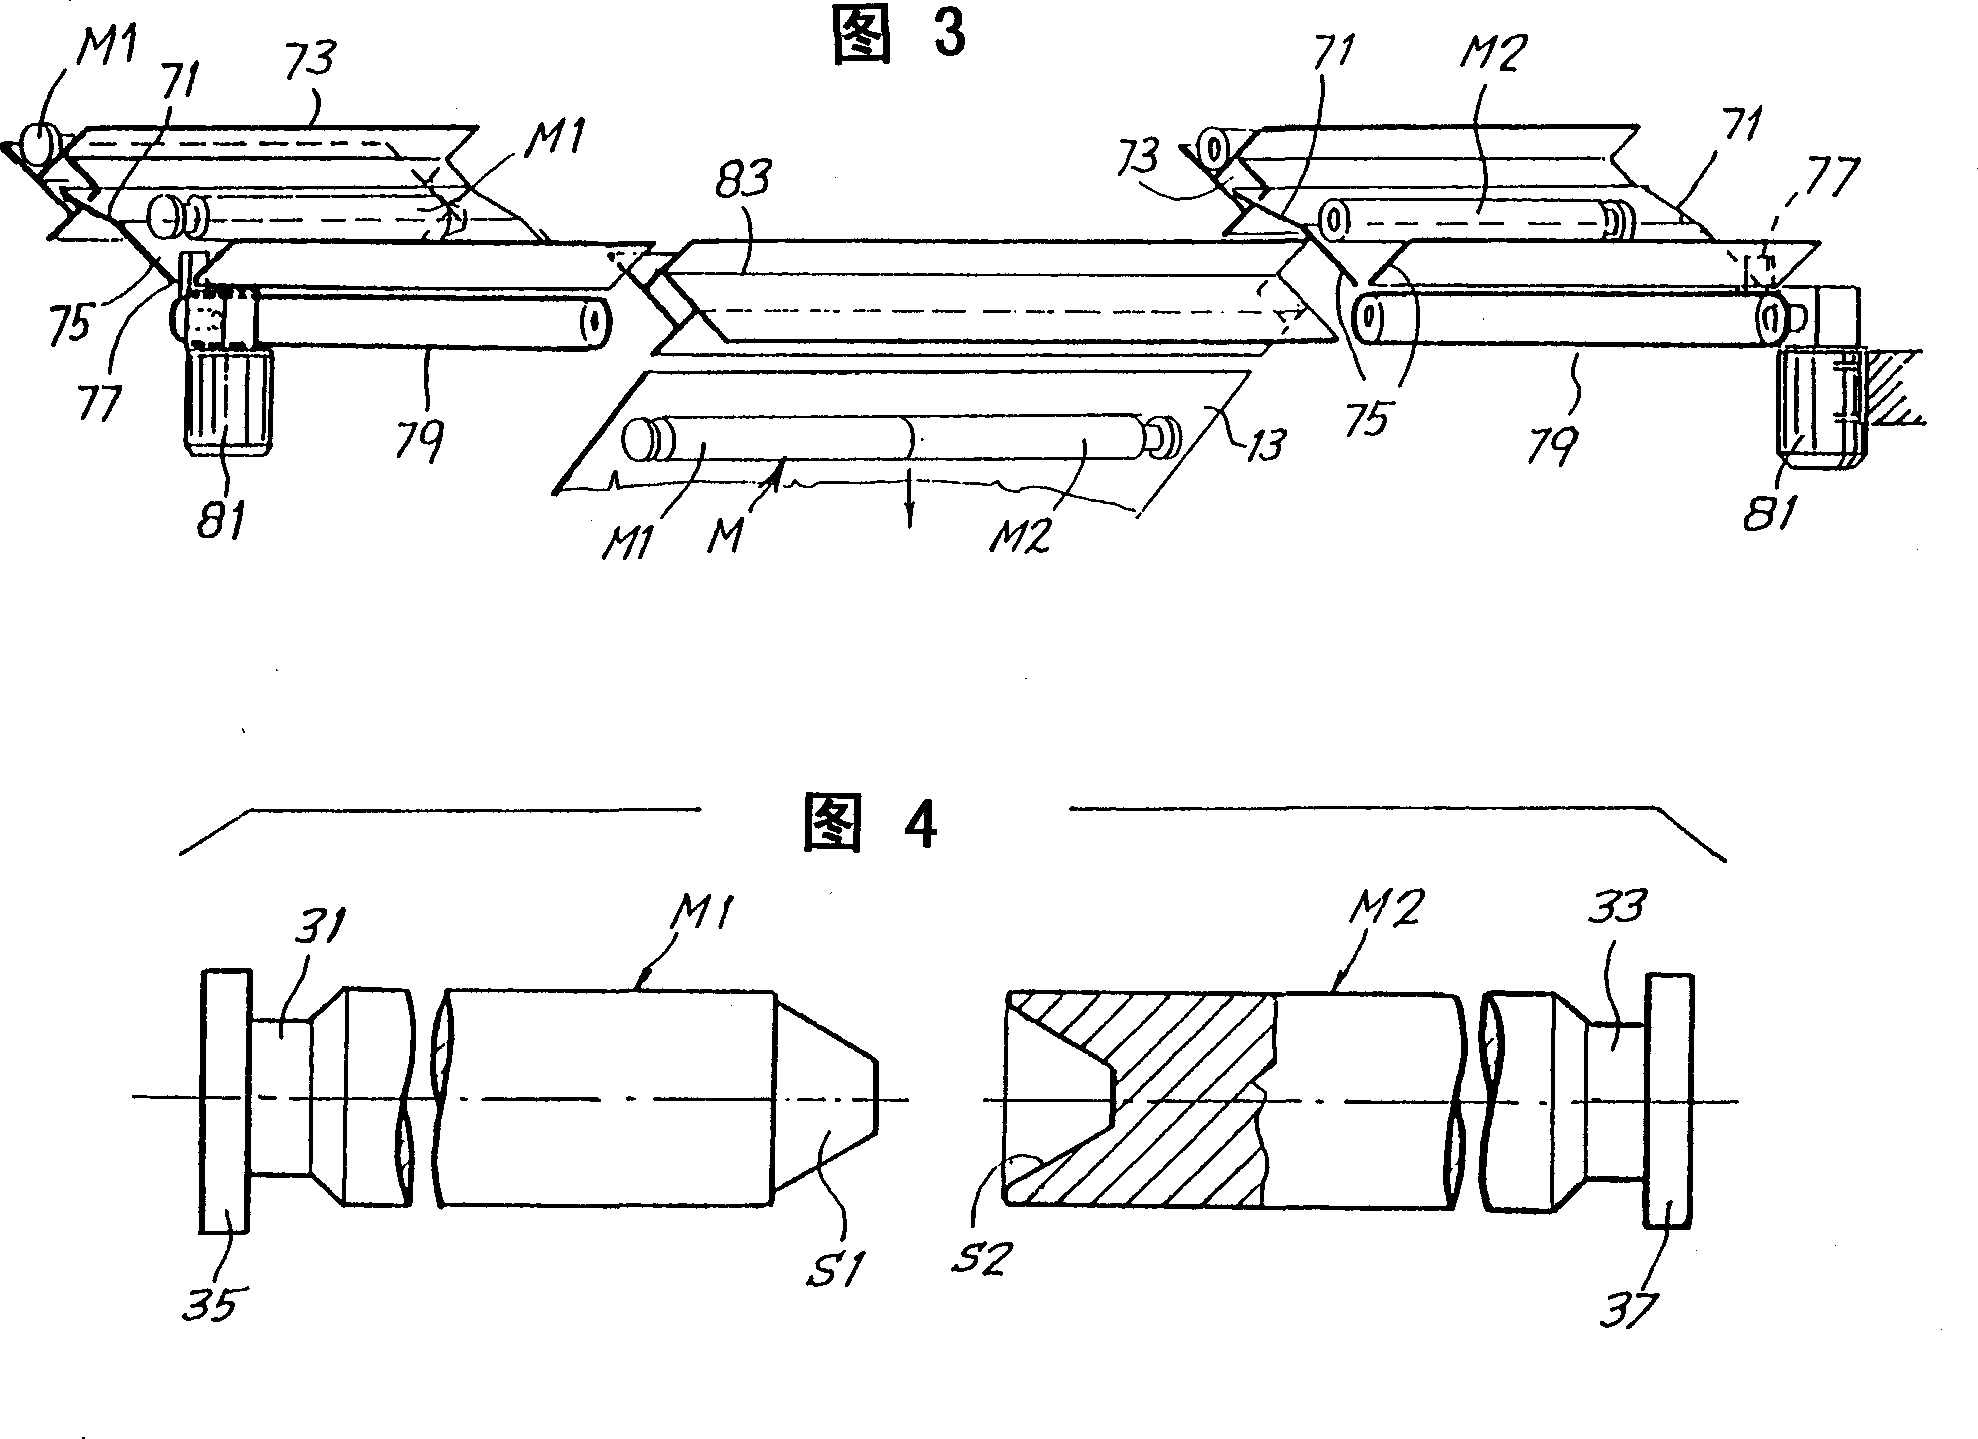 Peripheral rewinding machine for producting rolls of wound web material and corresponding method of winding